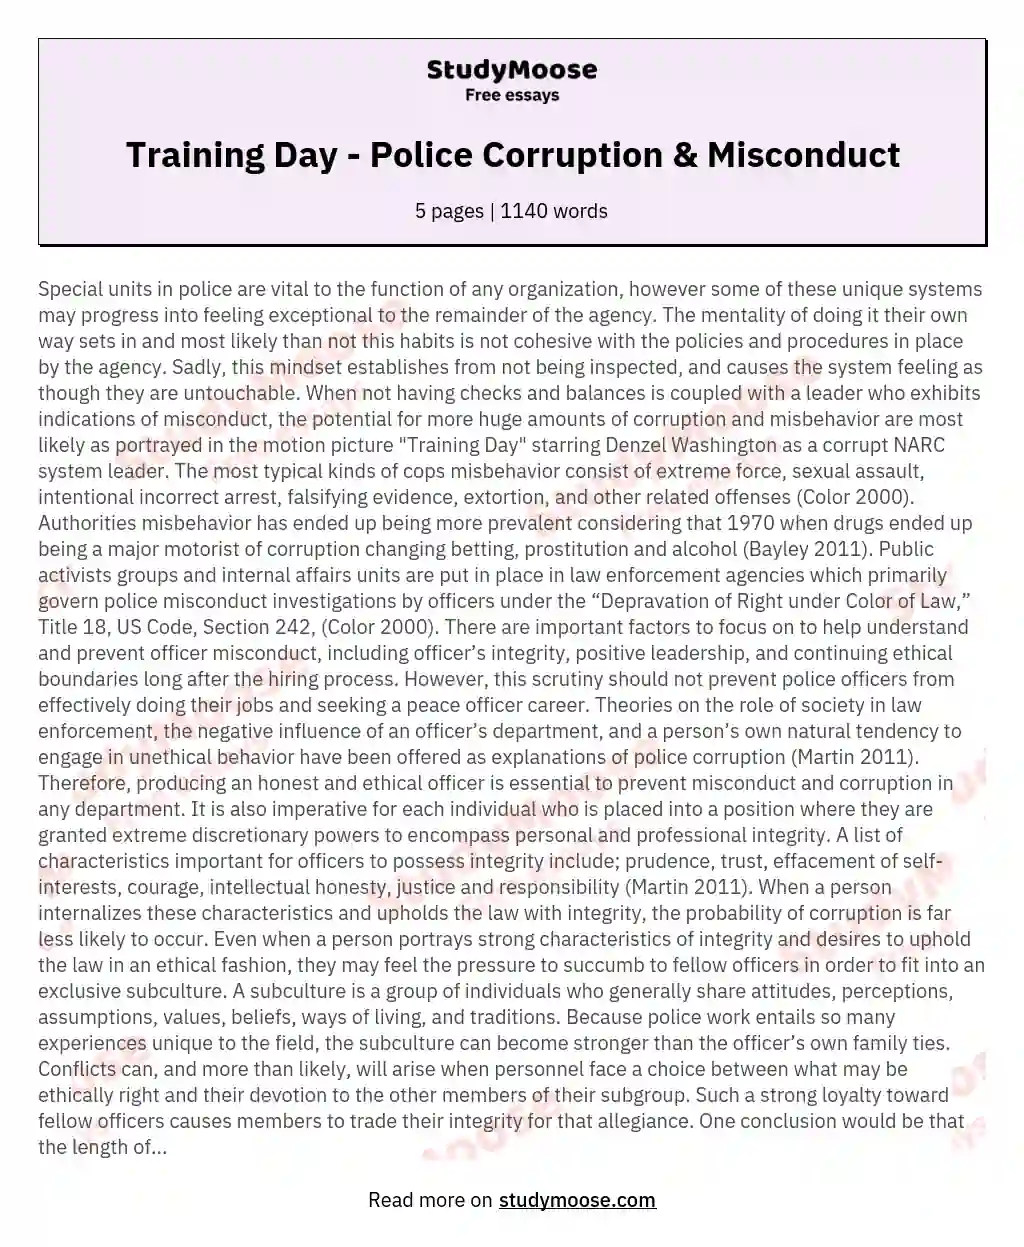 Training Day - Police Corruption &amp; Misconduct essay